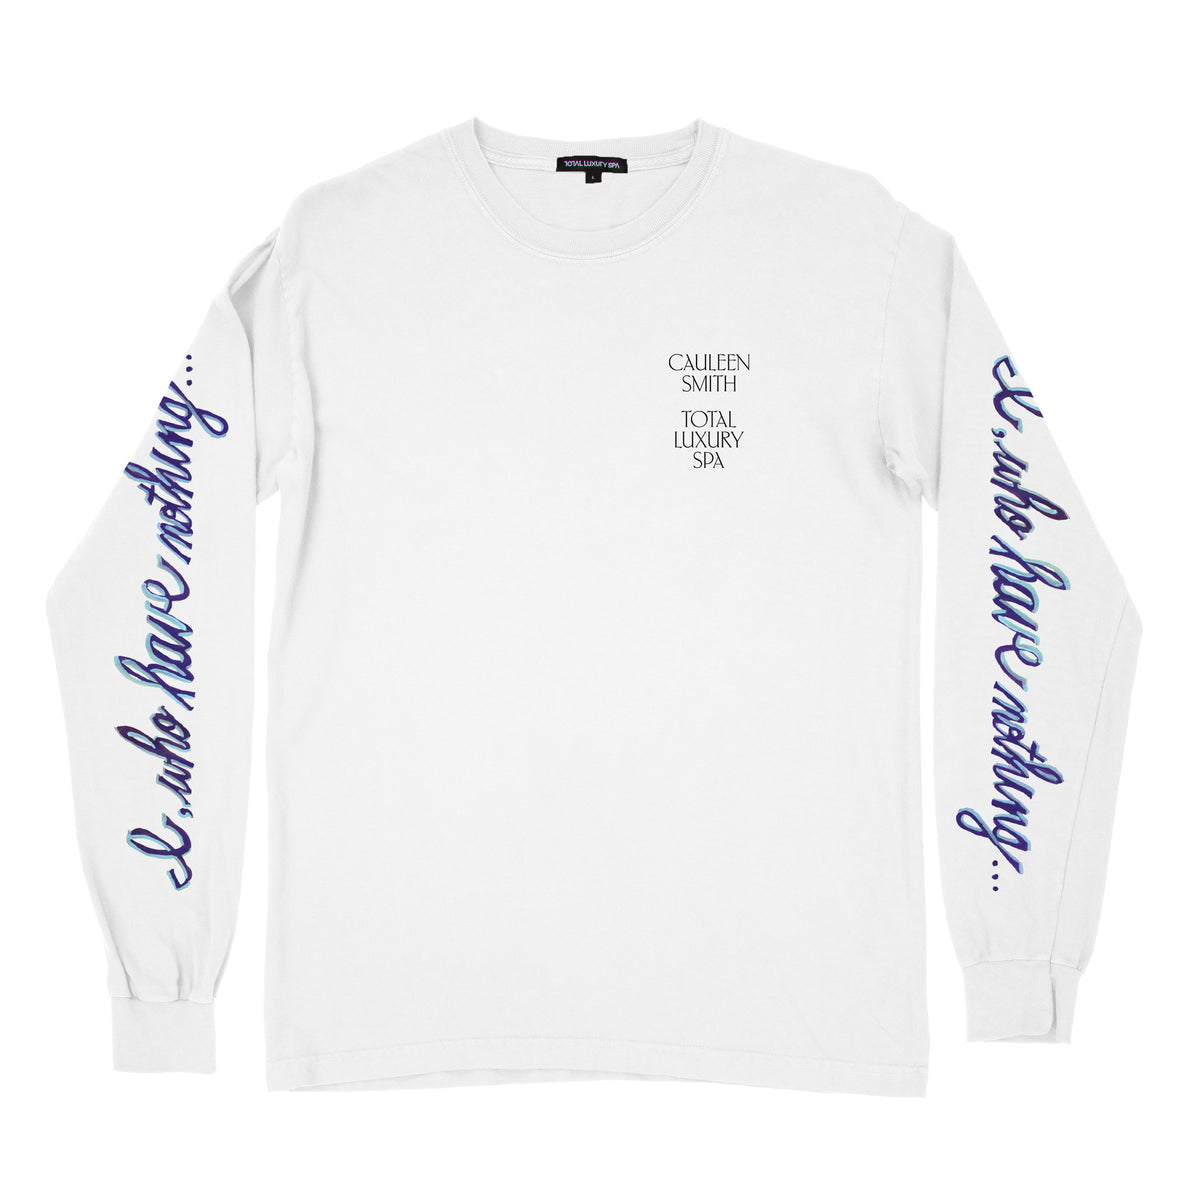 CAULEEN SMITH x TOTAL LUXURY SPA - I, WHO HAVE NOTHING - L/S TEE - WHITE